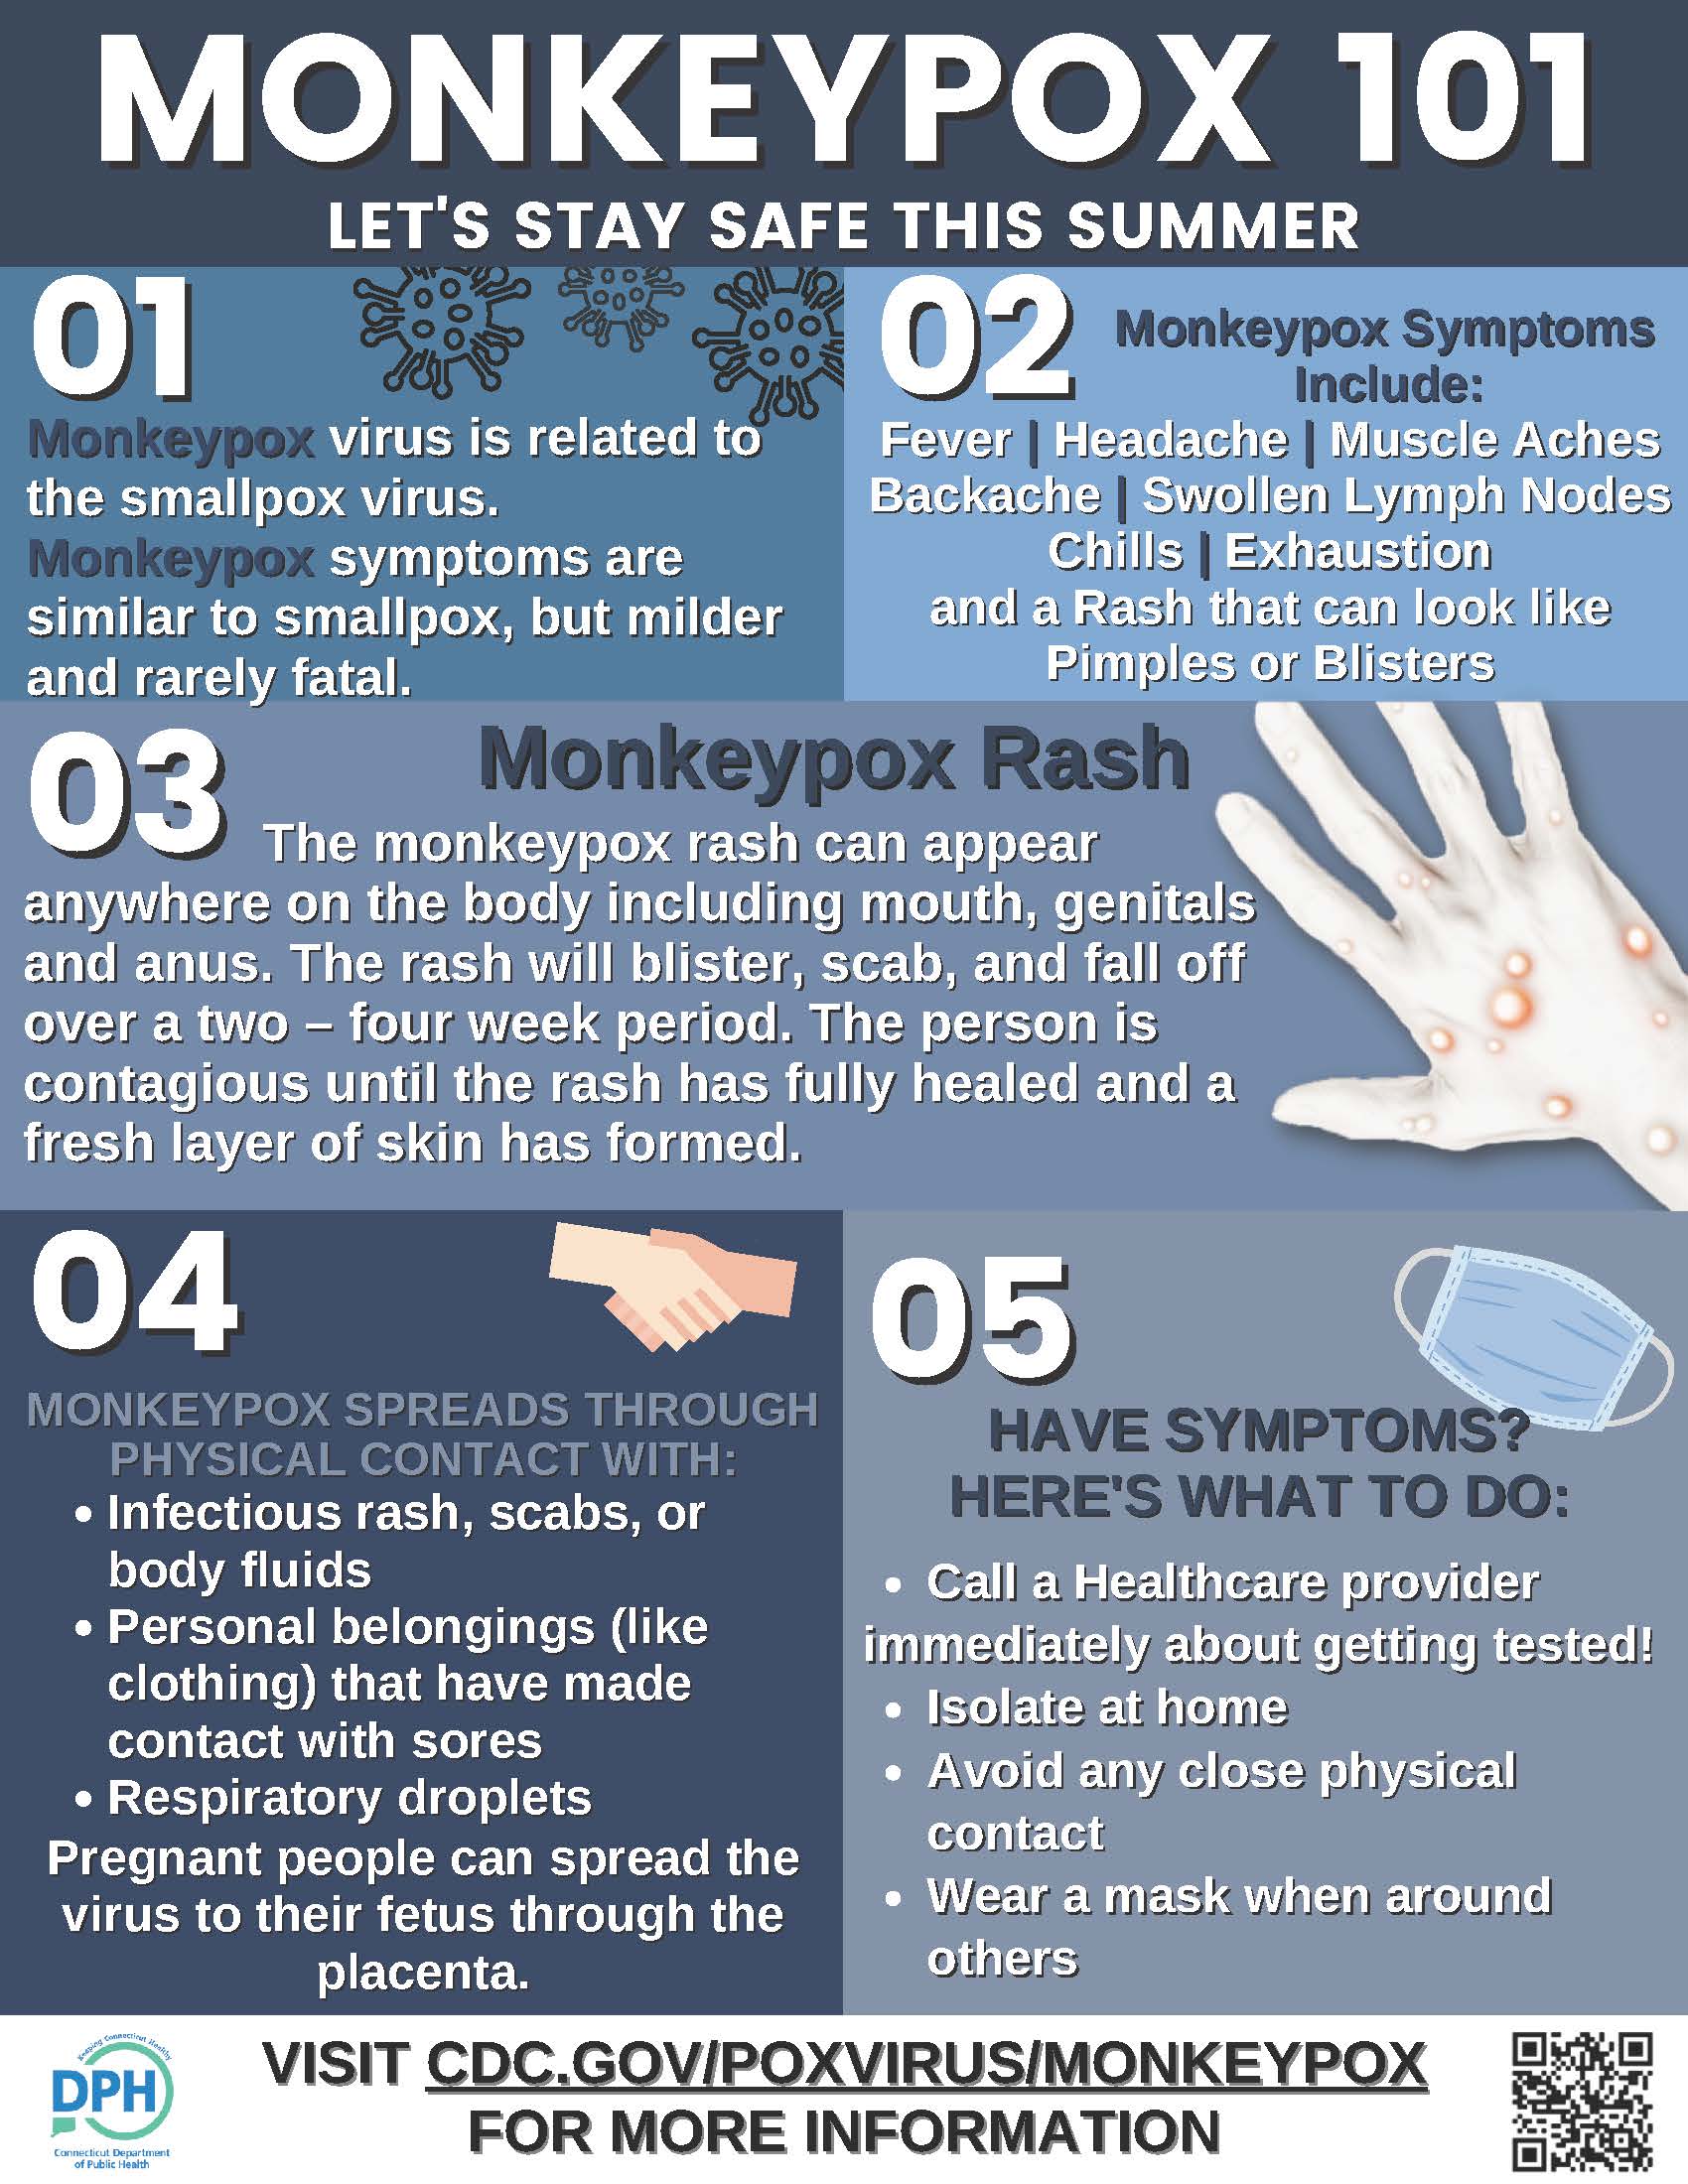 Monkeypox: How it spreads, who's at risk - here's what you need to know